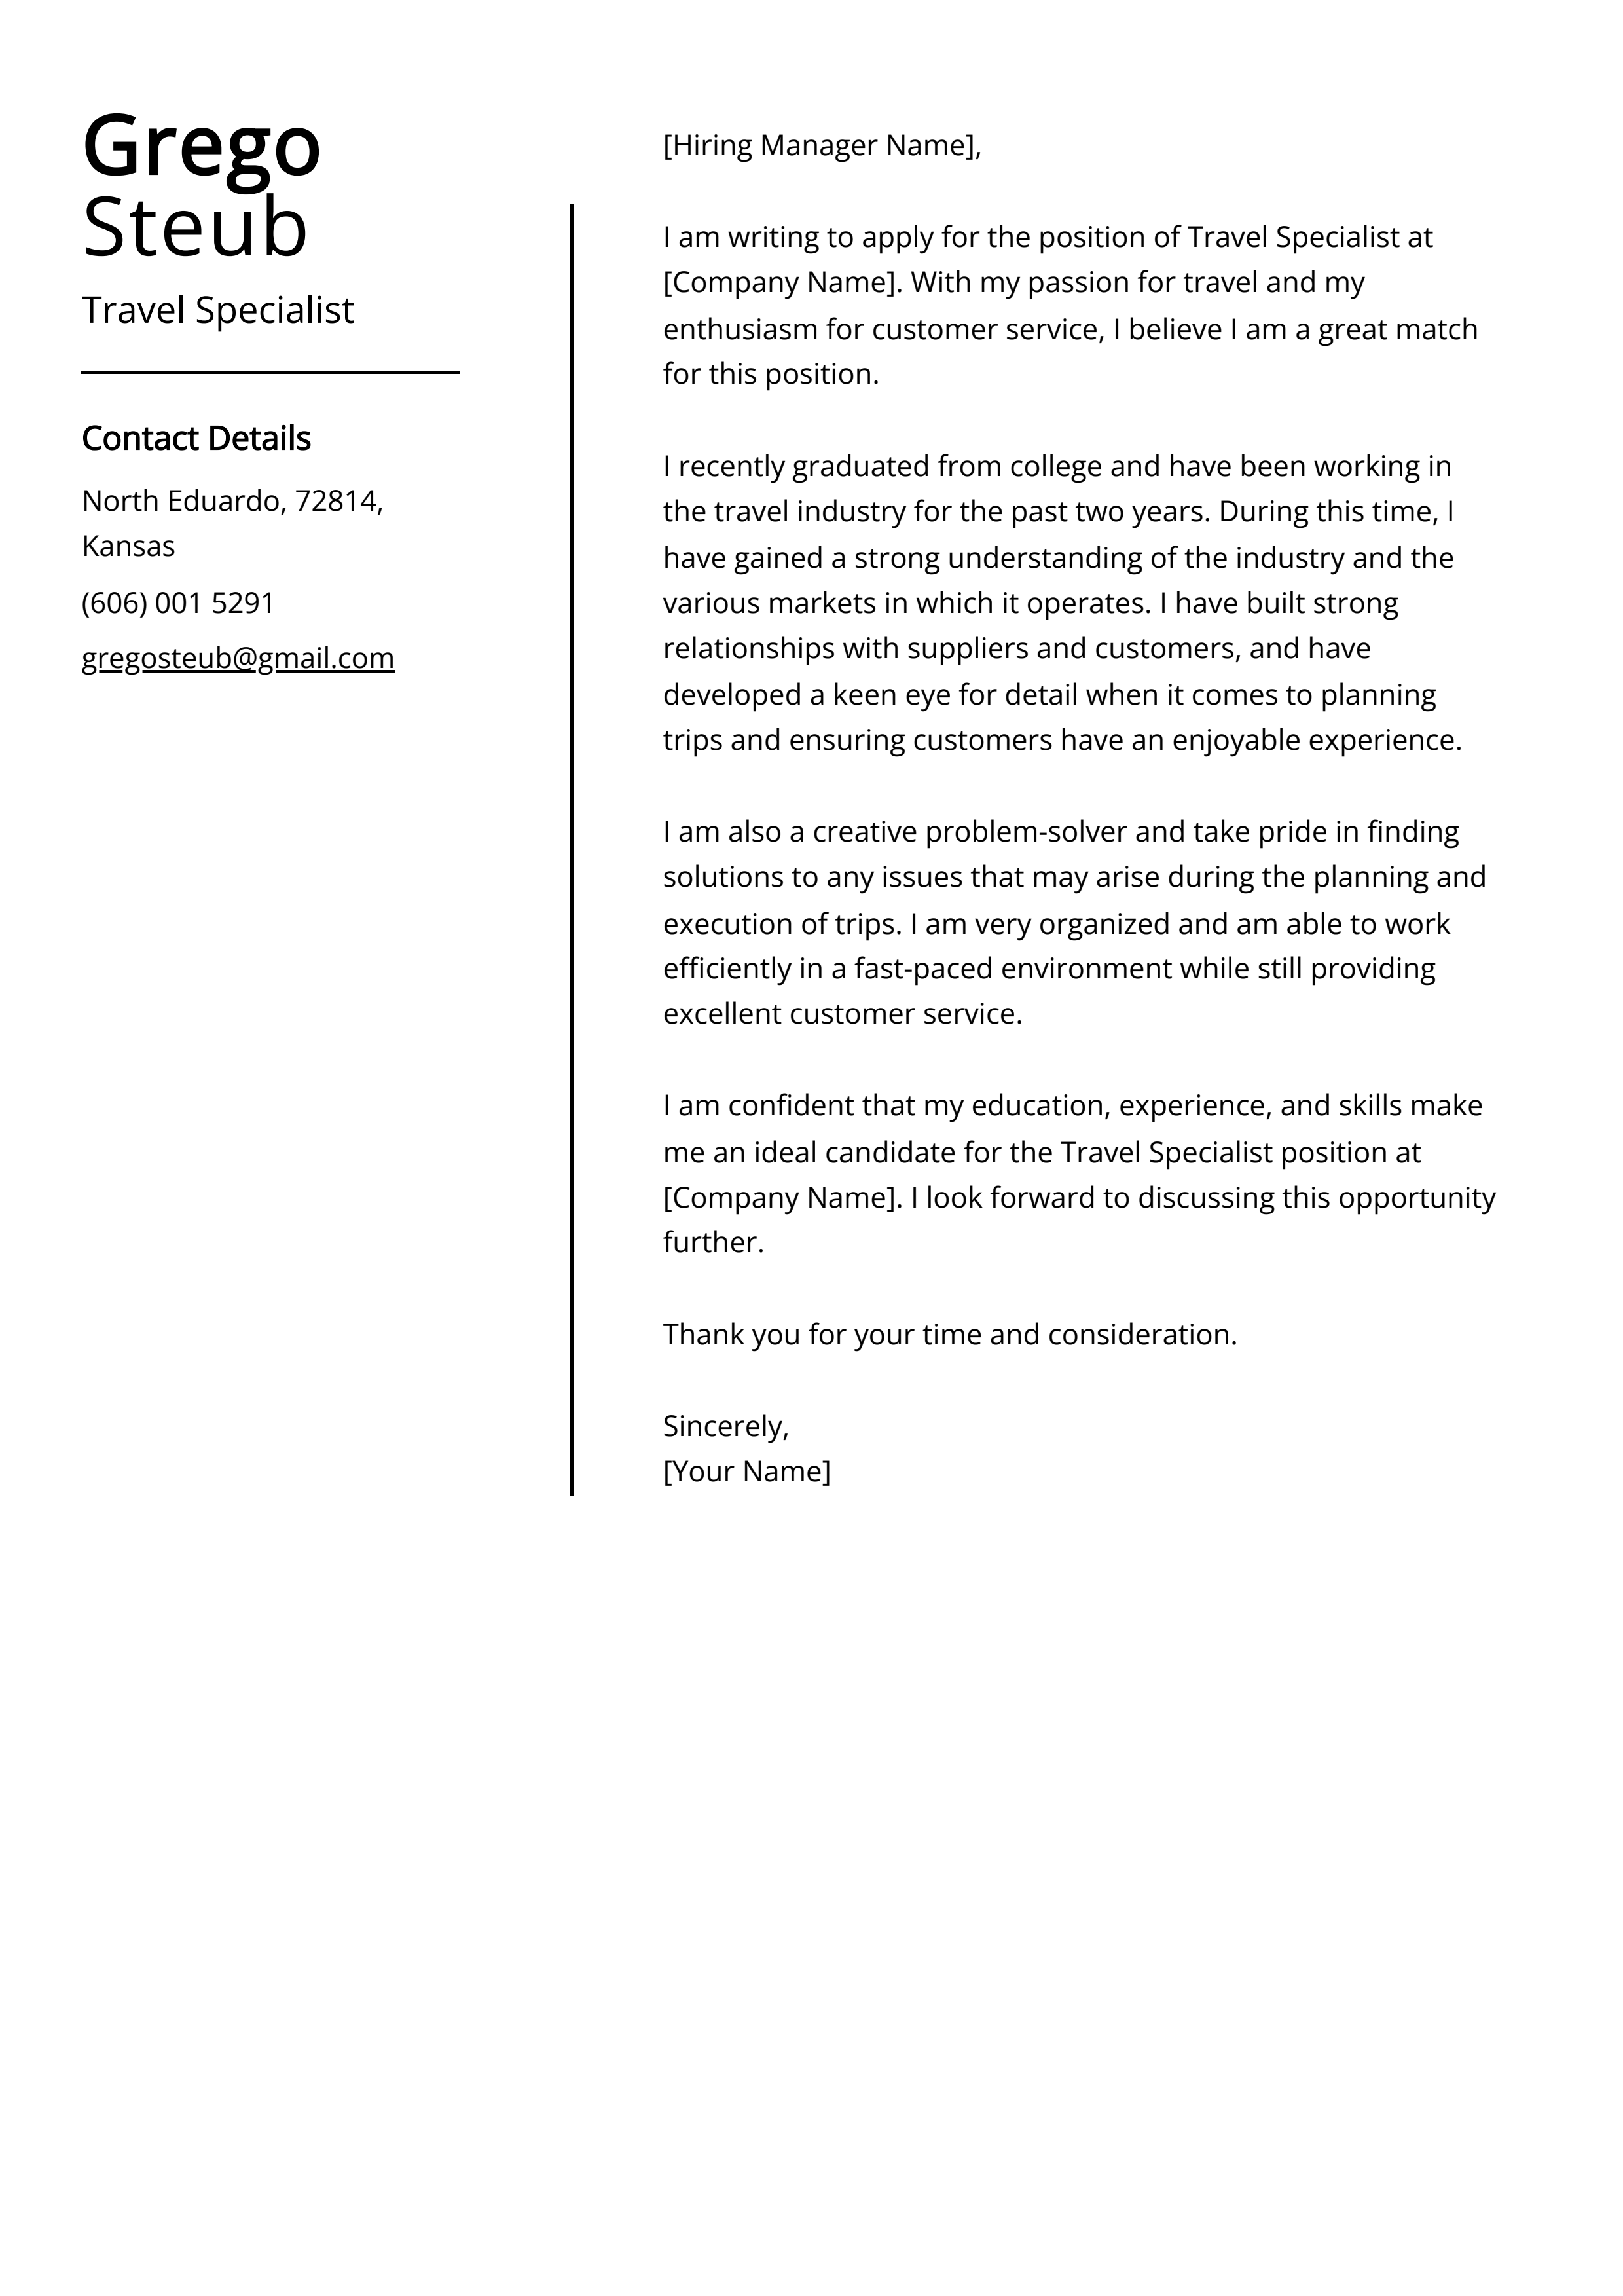 Travel Specialist Cover Letter Example